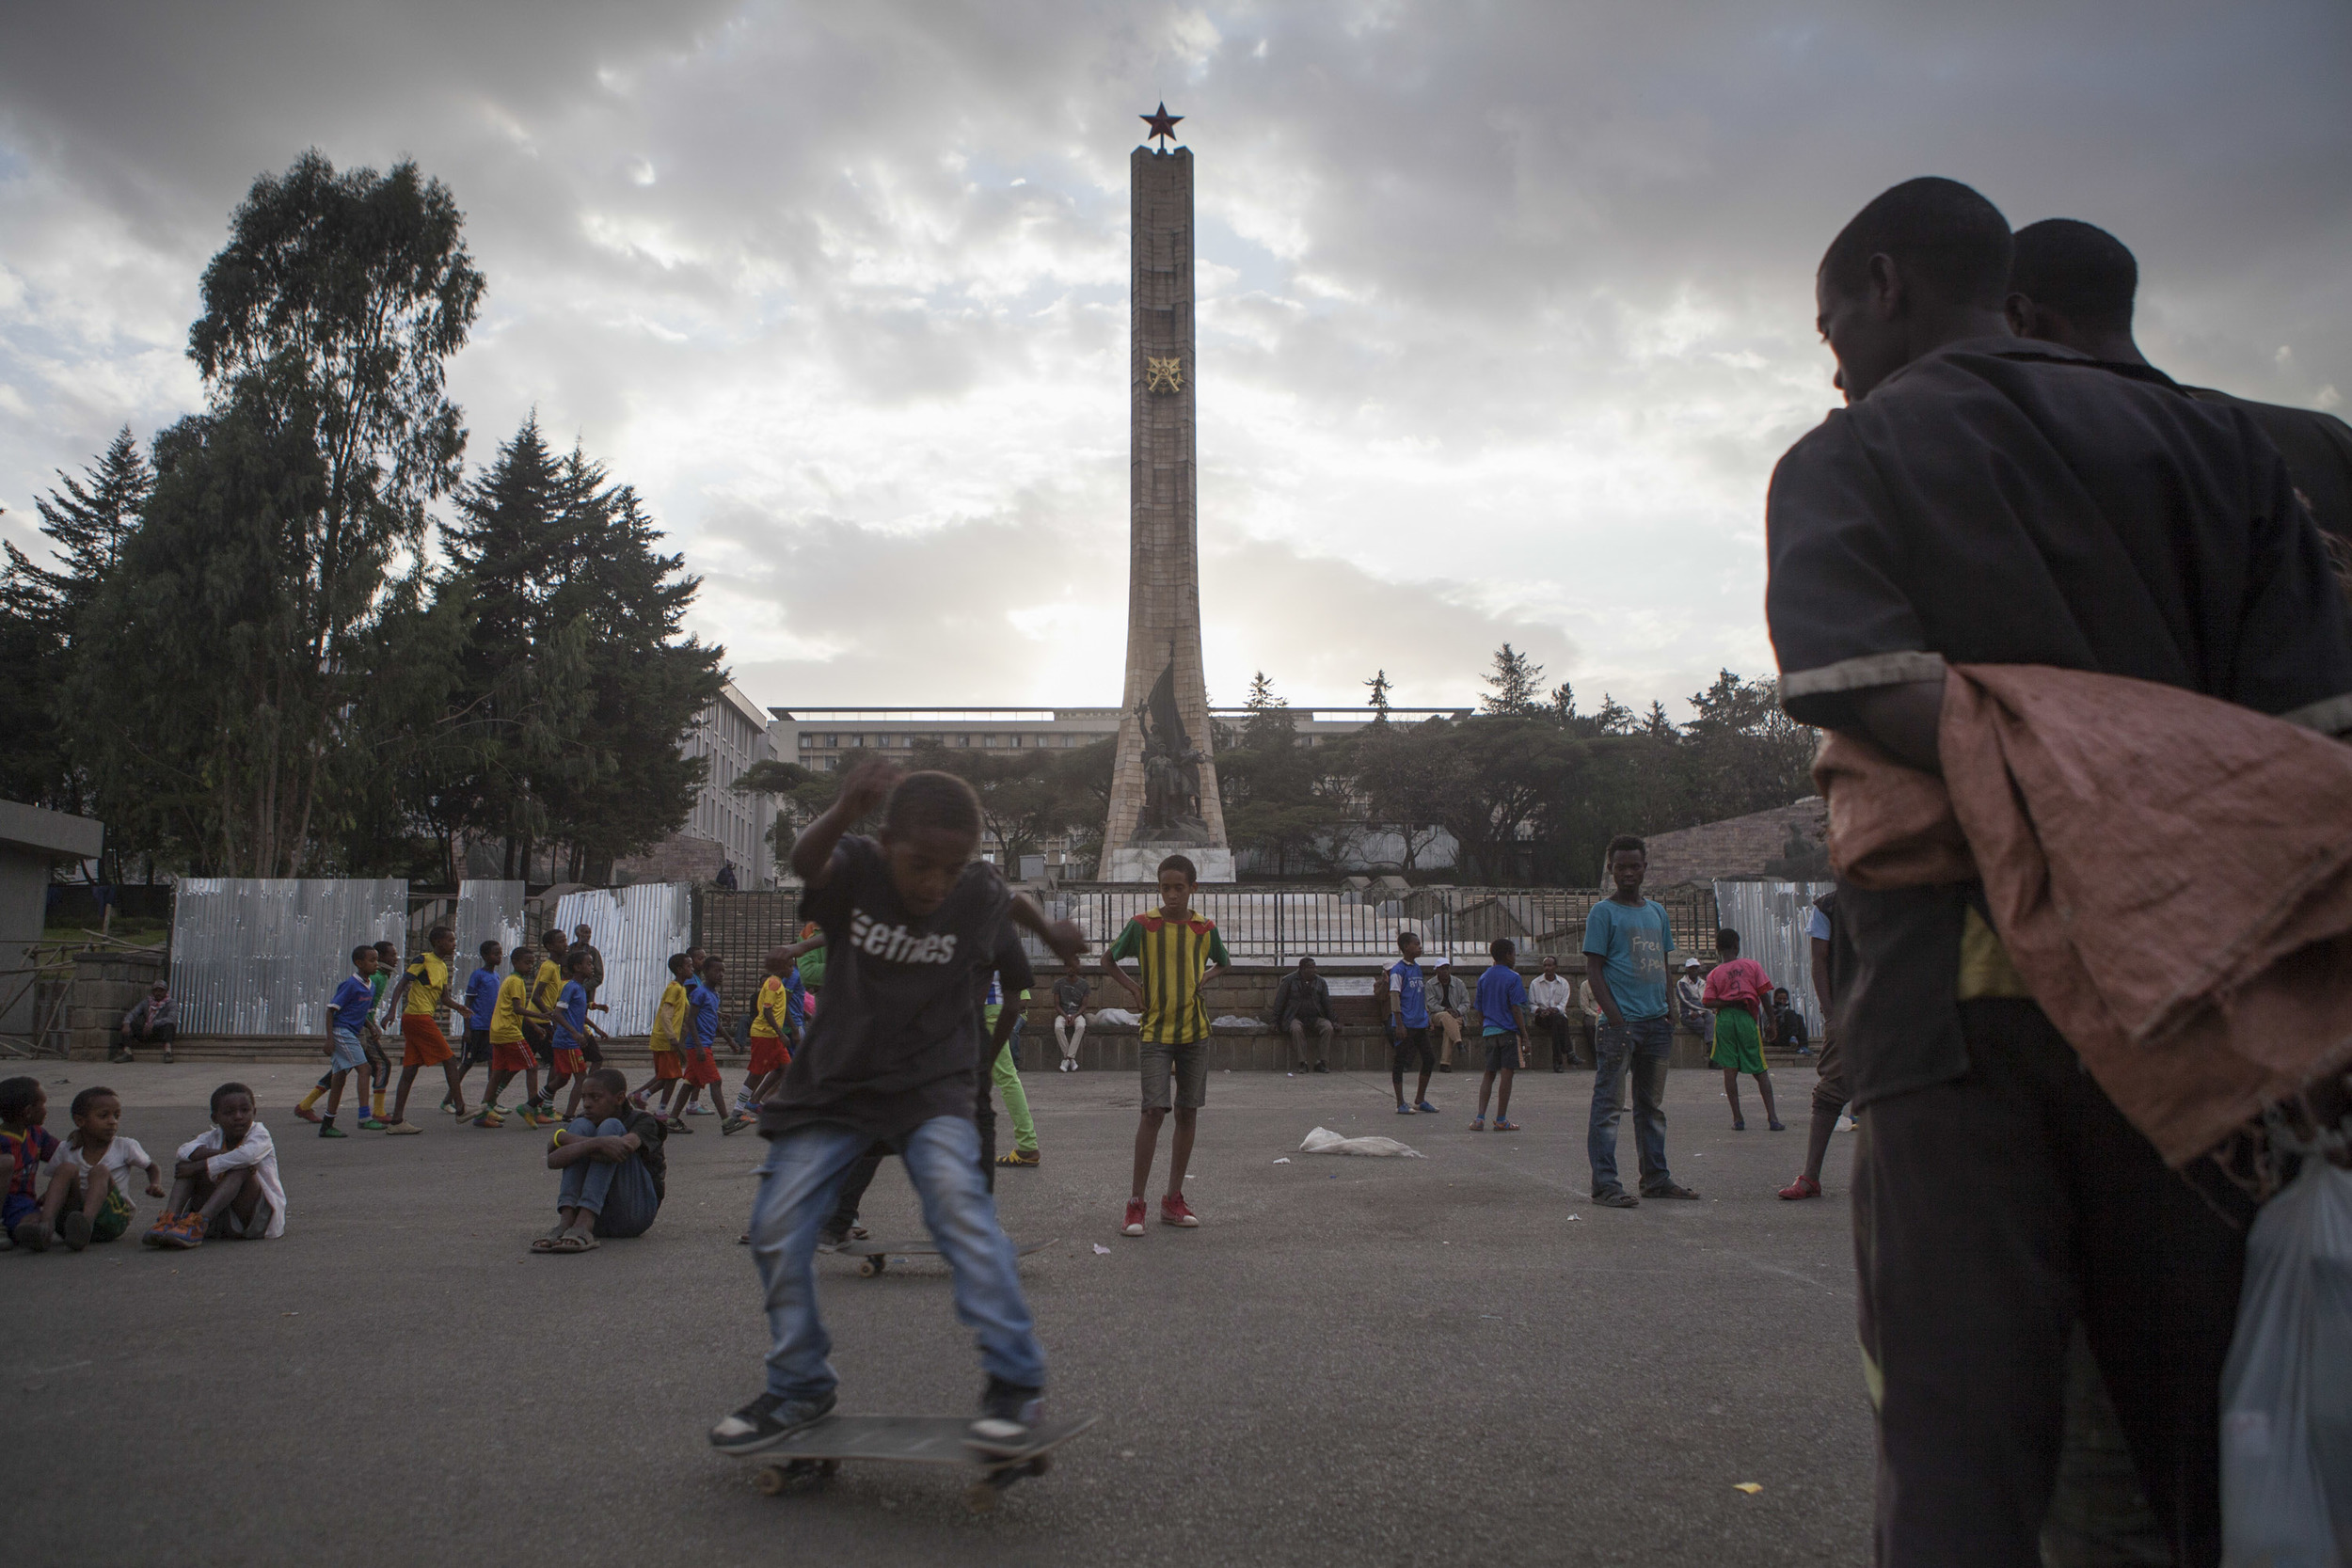  An Ethiopian skater, part of the Ethioskate organization, are pictured in the National Museum area of Addis Ababa on 12 March 2015. &nbsp;There is a growing skateboarding movement happening in Ethiopia, being taken up by various skating groups of yo